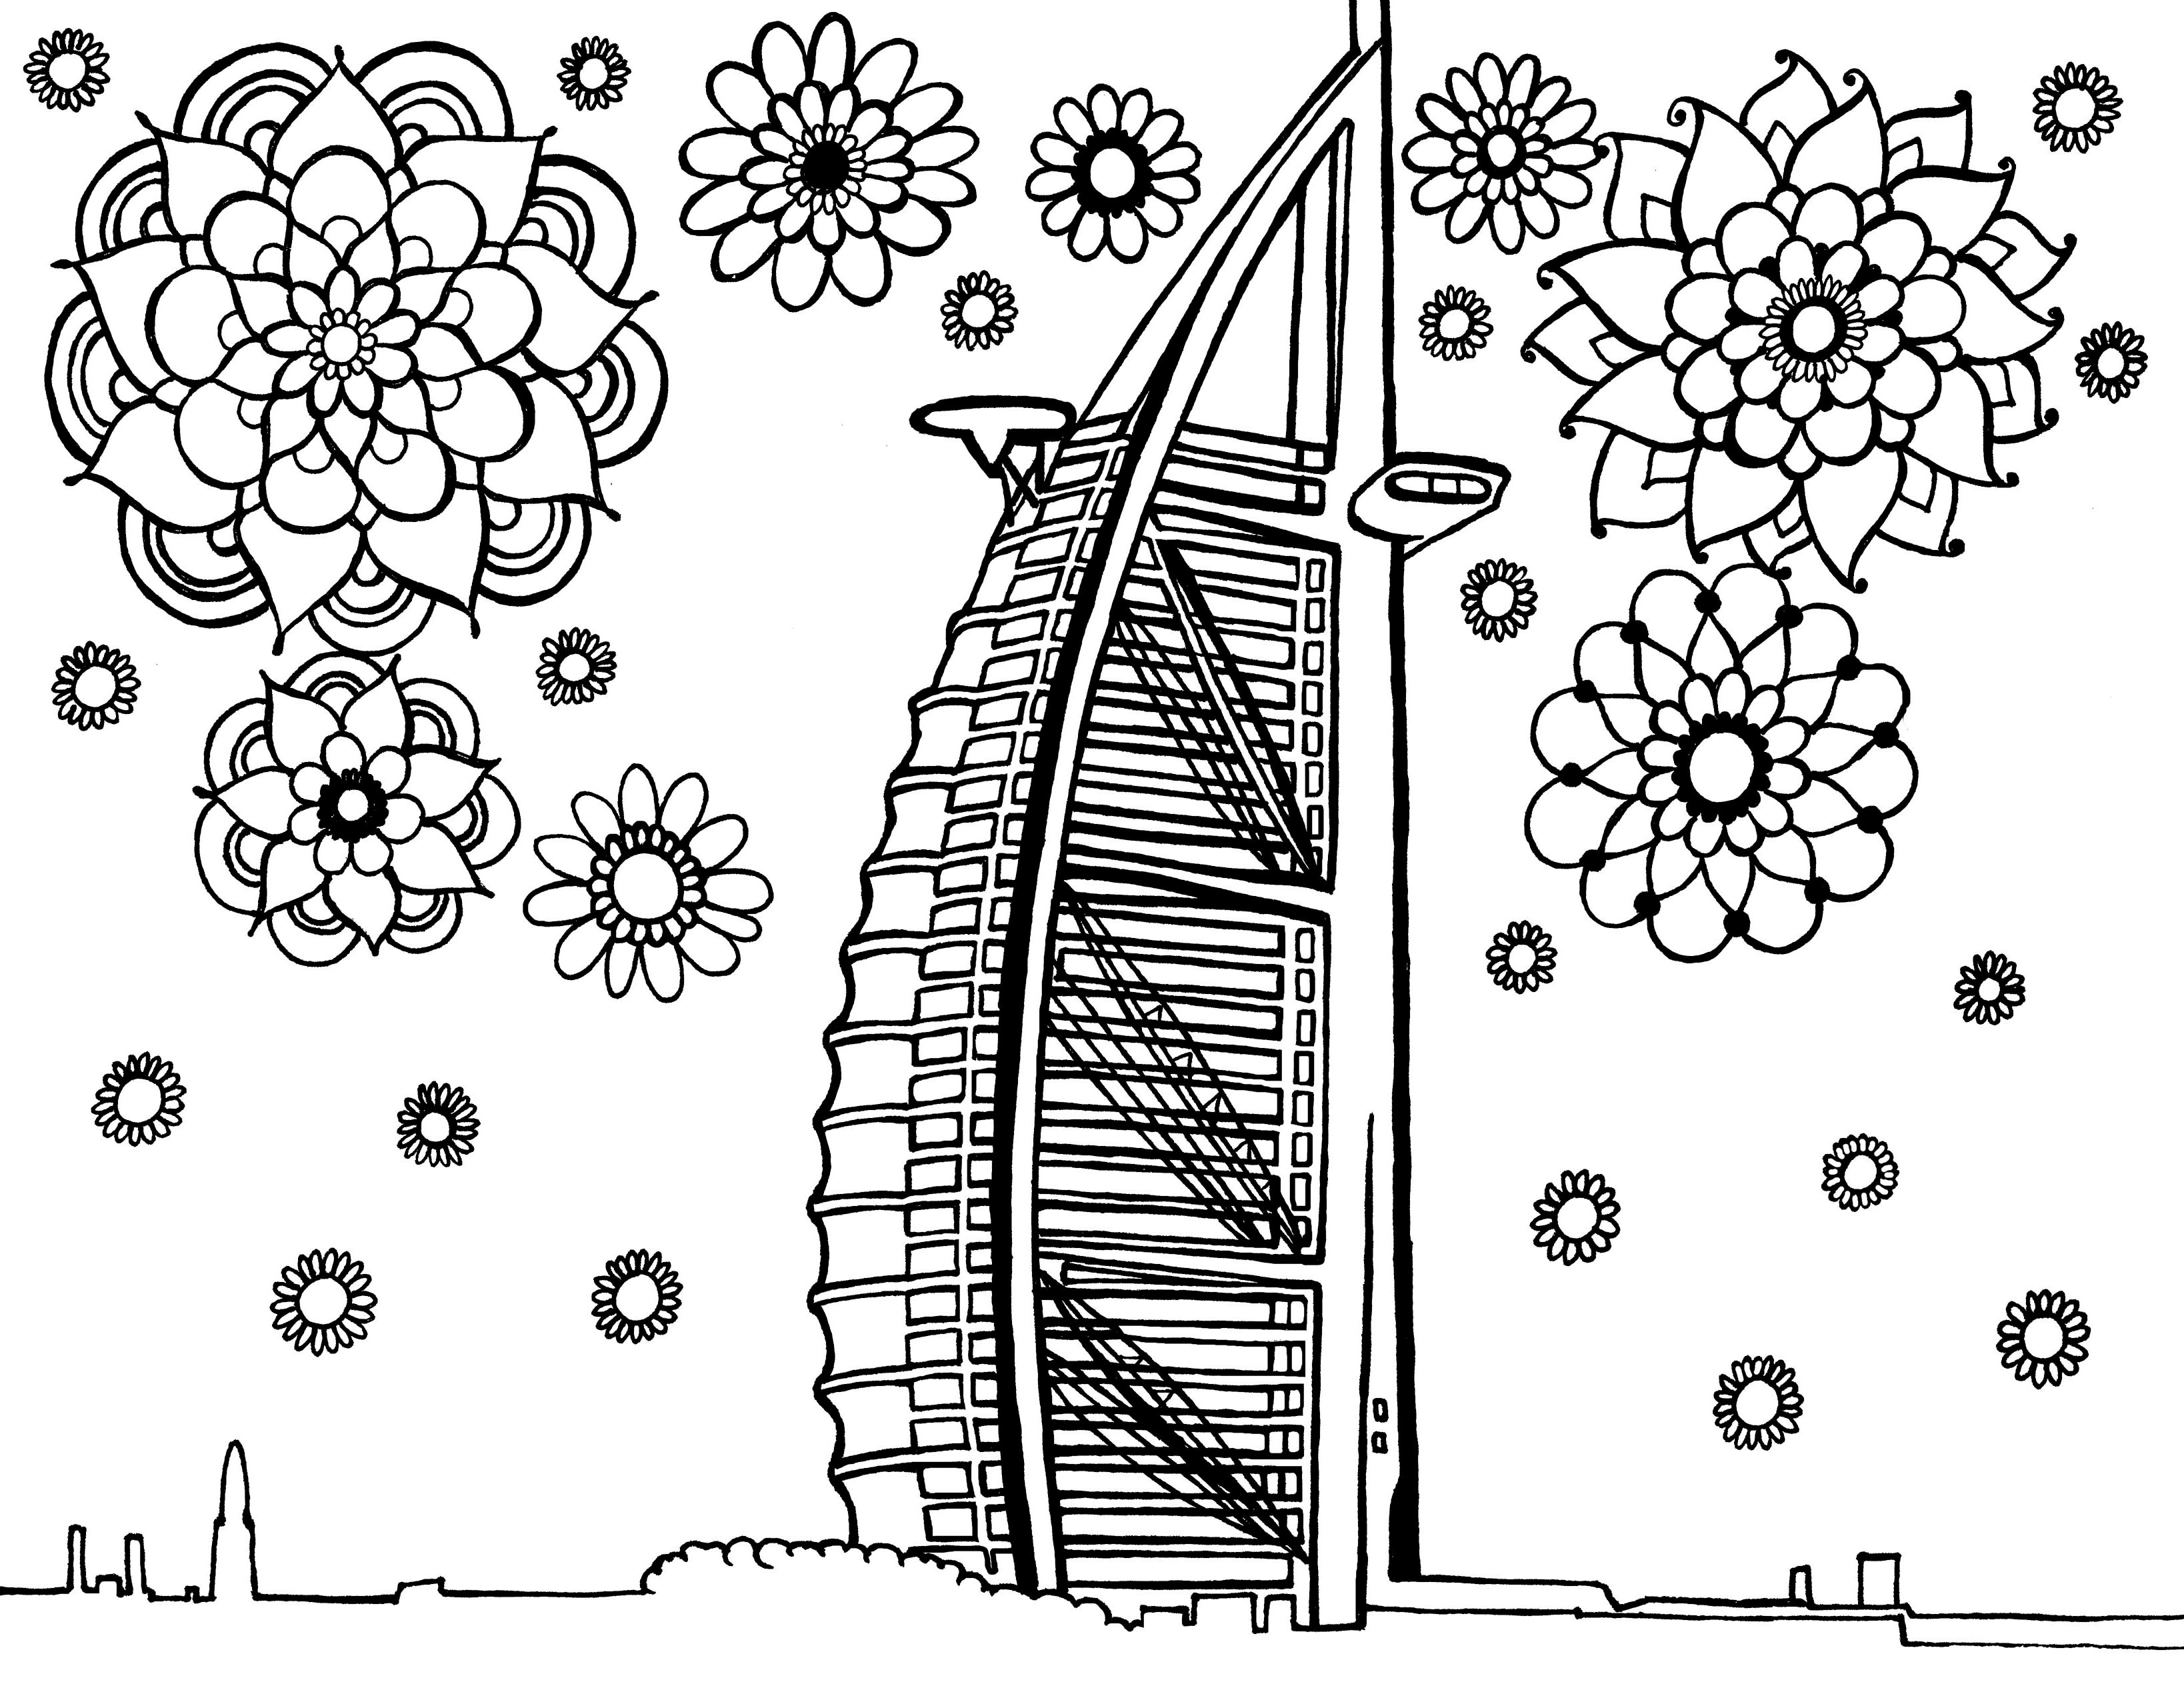 Black and white line drawing for coloring, featuring the iconic Burj Al Arab hotel in Dubai, characterized by its sail-shaped structure. The illustration is whimsically adorned with a variety of intricate floral patterns of different sizes floating around the building, creating a contrast between the modern architectural marvel and the traditional decorative flowers. The skyline is minimal, hinting at the city's silhouette in the background. Free coloring page :: You-Color